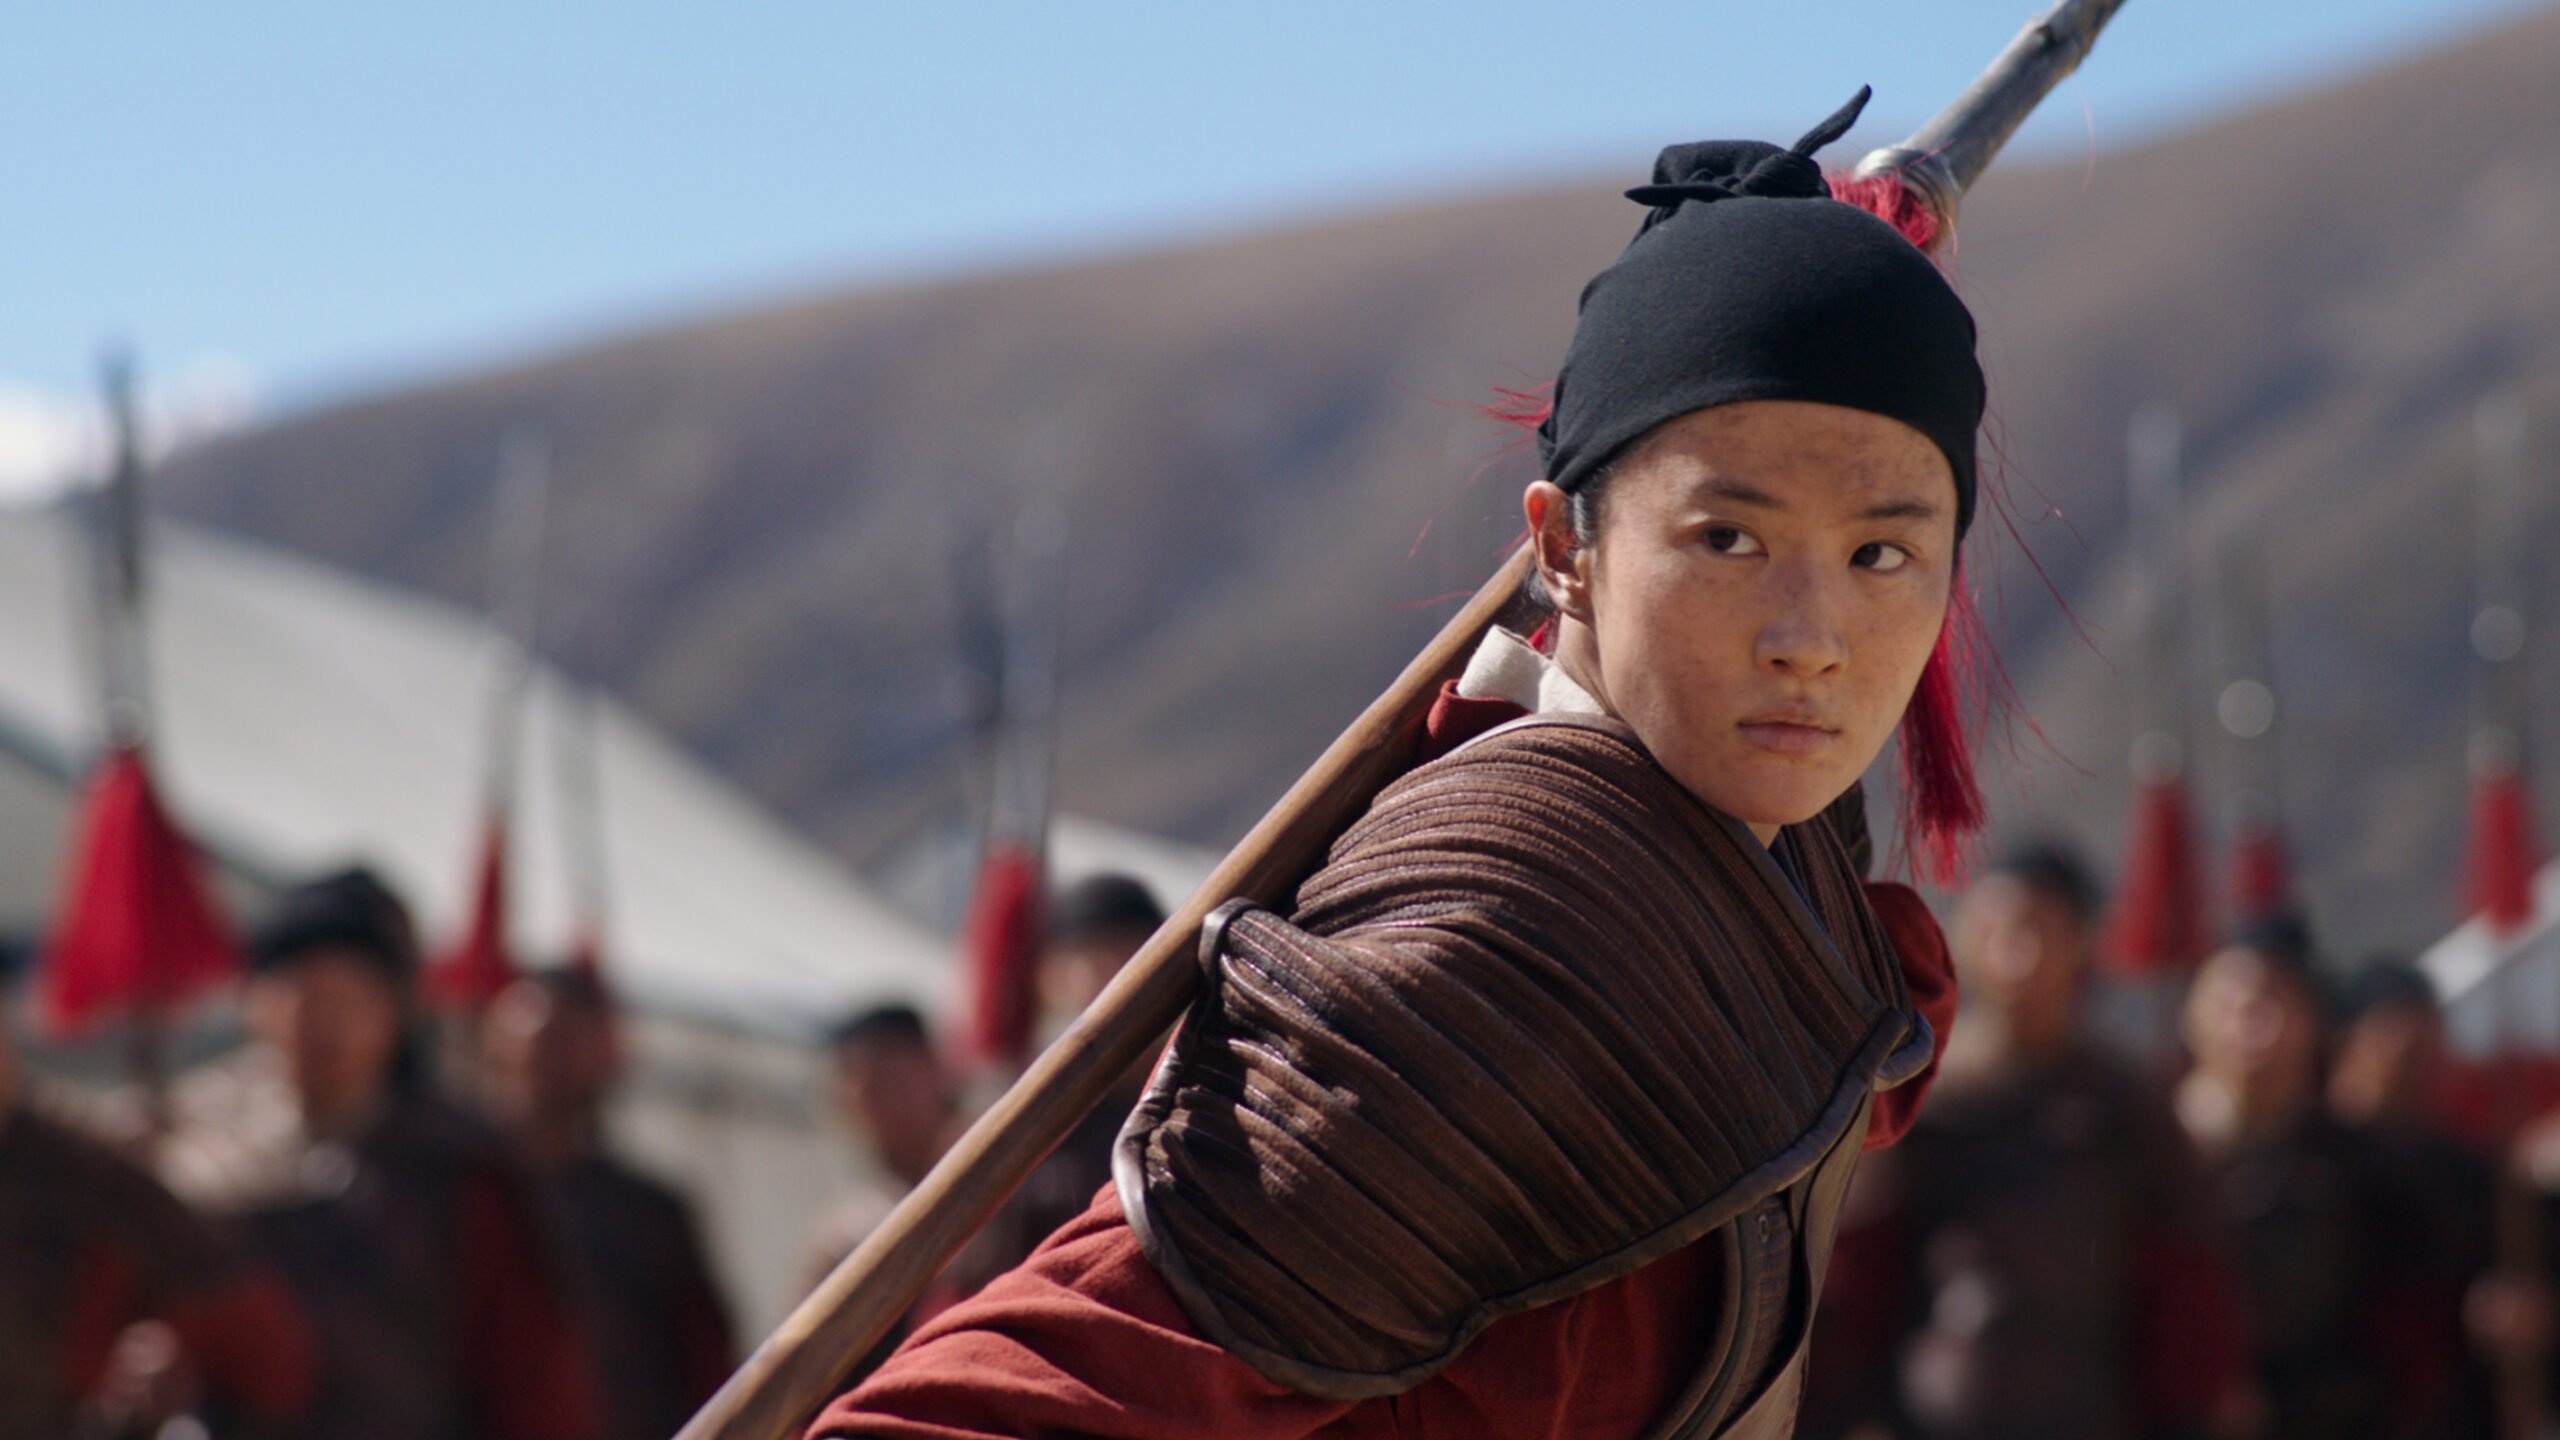 Mulan (Movie): The story of a girl who dresses as a man and joins the army. 2560x1440 HD Wallpaper.